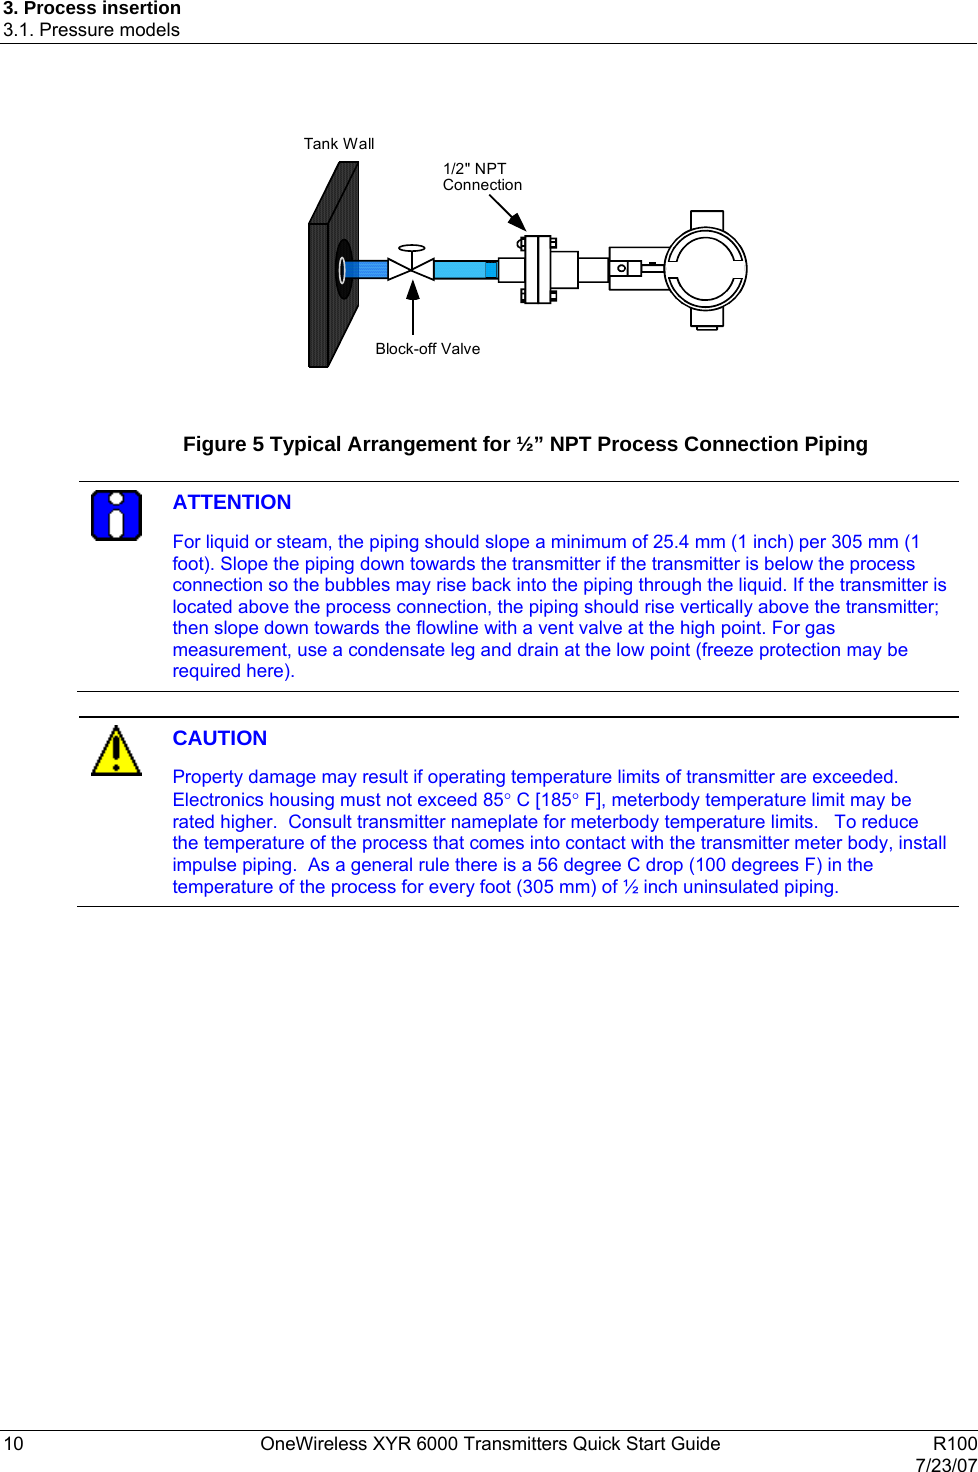 3. Process insertion 3.1. Pressure models 10  OneWireless XYR 6000 Transmitters Quick Start Guide   R100   7/23/07    Block-off Valve 1/2&quot; NPTConnectionTank Wall   Figure 5 Typical Arrangement for ½” NPT Process Connection Piping   ATTENTION For liquid or steam, the piping should slope a minimum of 25.4 mm (1 inch) per 305 mm (1 foot). Slope the piping down towards the transmitter if the transmitter is below the process connection so the bubbles may rise back into the piping through the liquid. If the transmitter is located above the process connection, the piping should rise vertically above the transmitter; then slope down towards the flowline with a vent valve at the high point. For gas measurement, use a condensate leg and drain at the low point (freeze protection may be required here).    CAUTION Property damage may result if operating temperature limits of transmitter are exceeded. Electronics housing must not exceed 85° C [185° F], meterbody temperature limit may be rated higher.  Consult transmitter nameplate for meterbody temperature limits.   To reduce the temperature of the process that comes into contact with the transmitter meter body, install impulse piping.  As a general rule there is a 56 degree C drop (100 degrees F) in the temperature of the process for every foot (305 mm) of ½ inch uninsulated piping.  